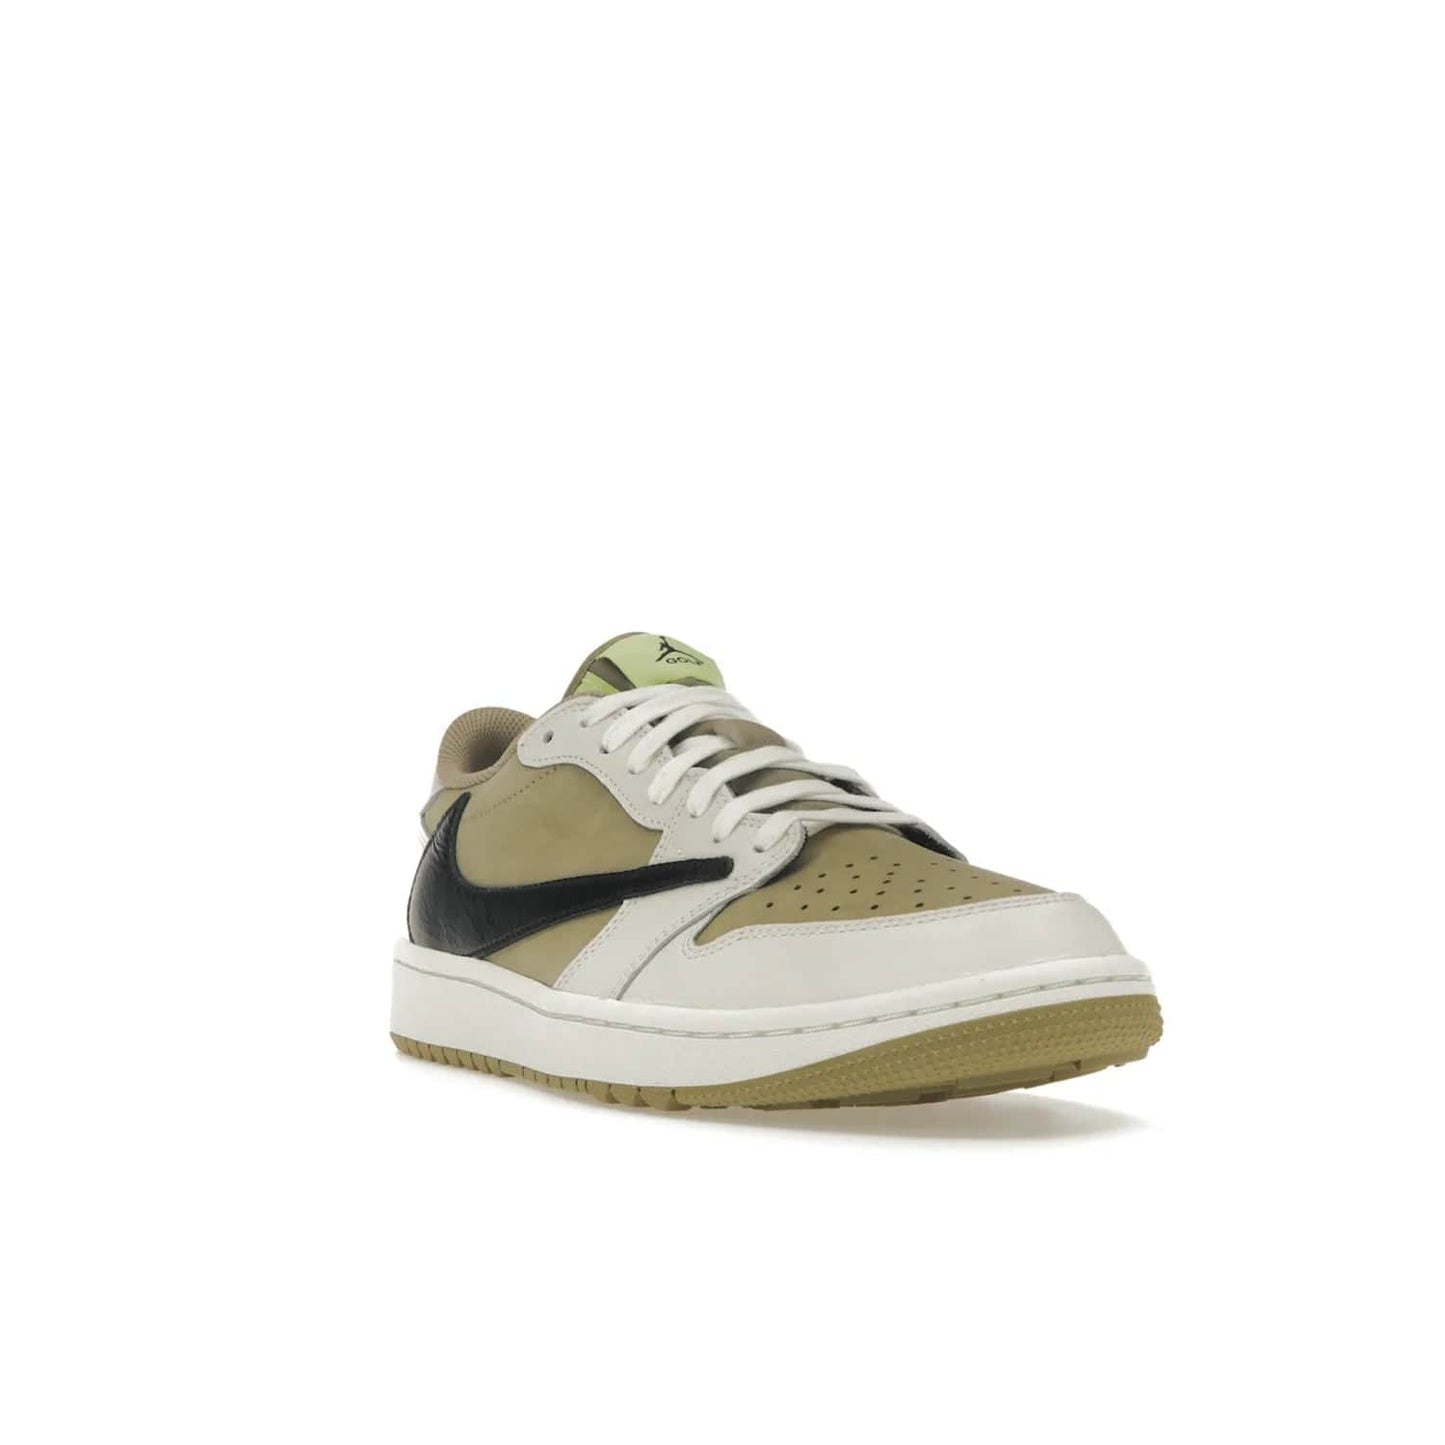 Jordan 1 Retro Low Golf Travis Scott Neutral Olive - Image 7 - Only at www.BallersClubKickz.com - Explore the unique Jordan 1 Retro Low Golf Travis Scott Neutral Olive, an olive-green sneaker collaboration between the iconic Jordan Brand and music royalty, Travis Scott. This special pair is tailored for the golf course with altered traction, hardened rubber, and a sleek style perfect for everyday wear. Get your pair and impress the crowd with its signature earth tones.